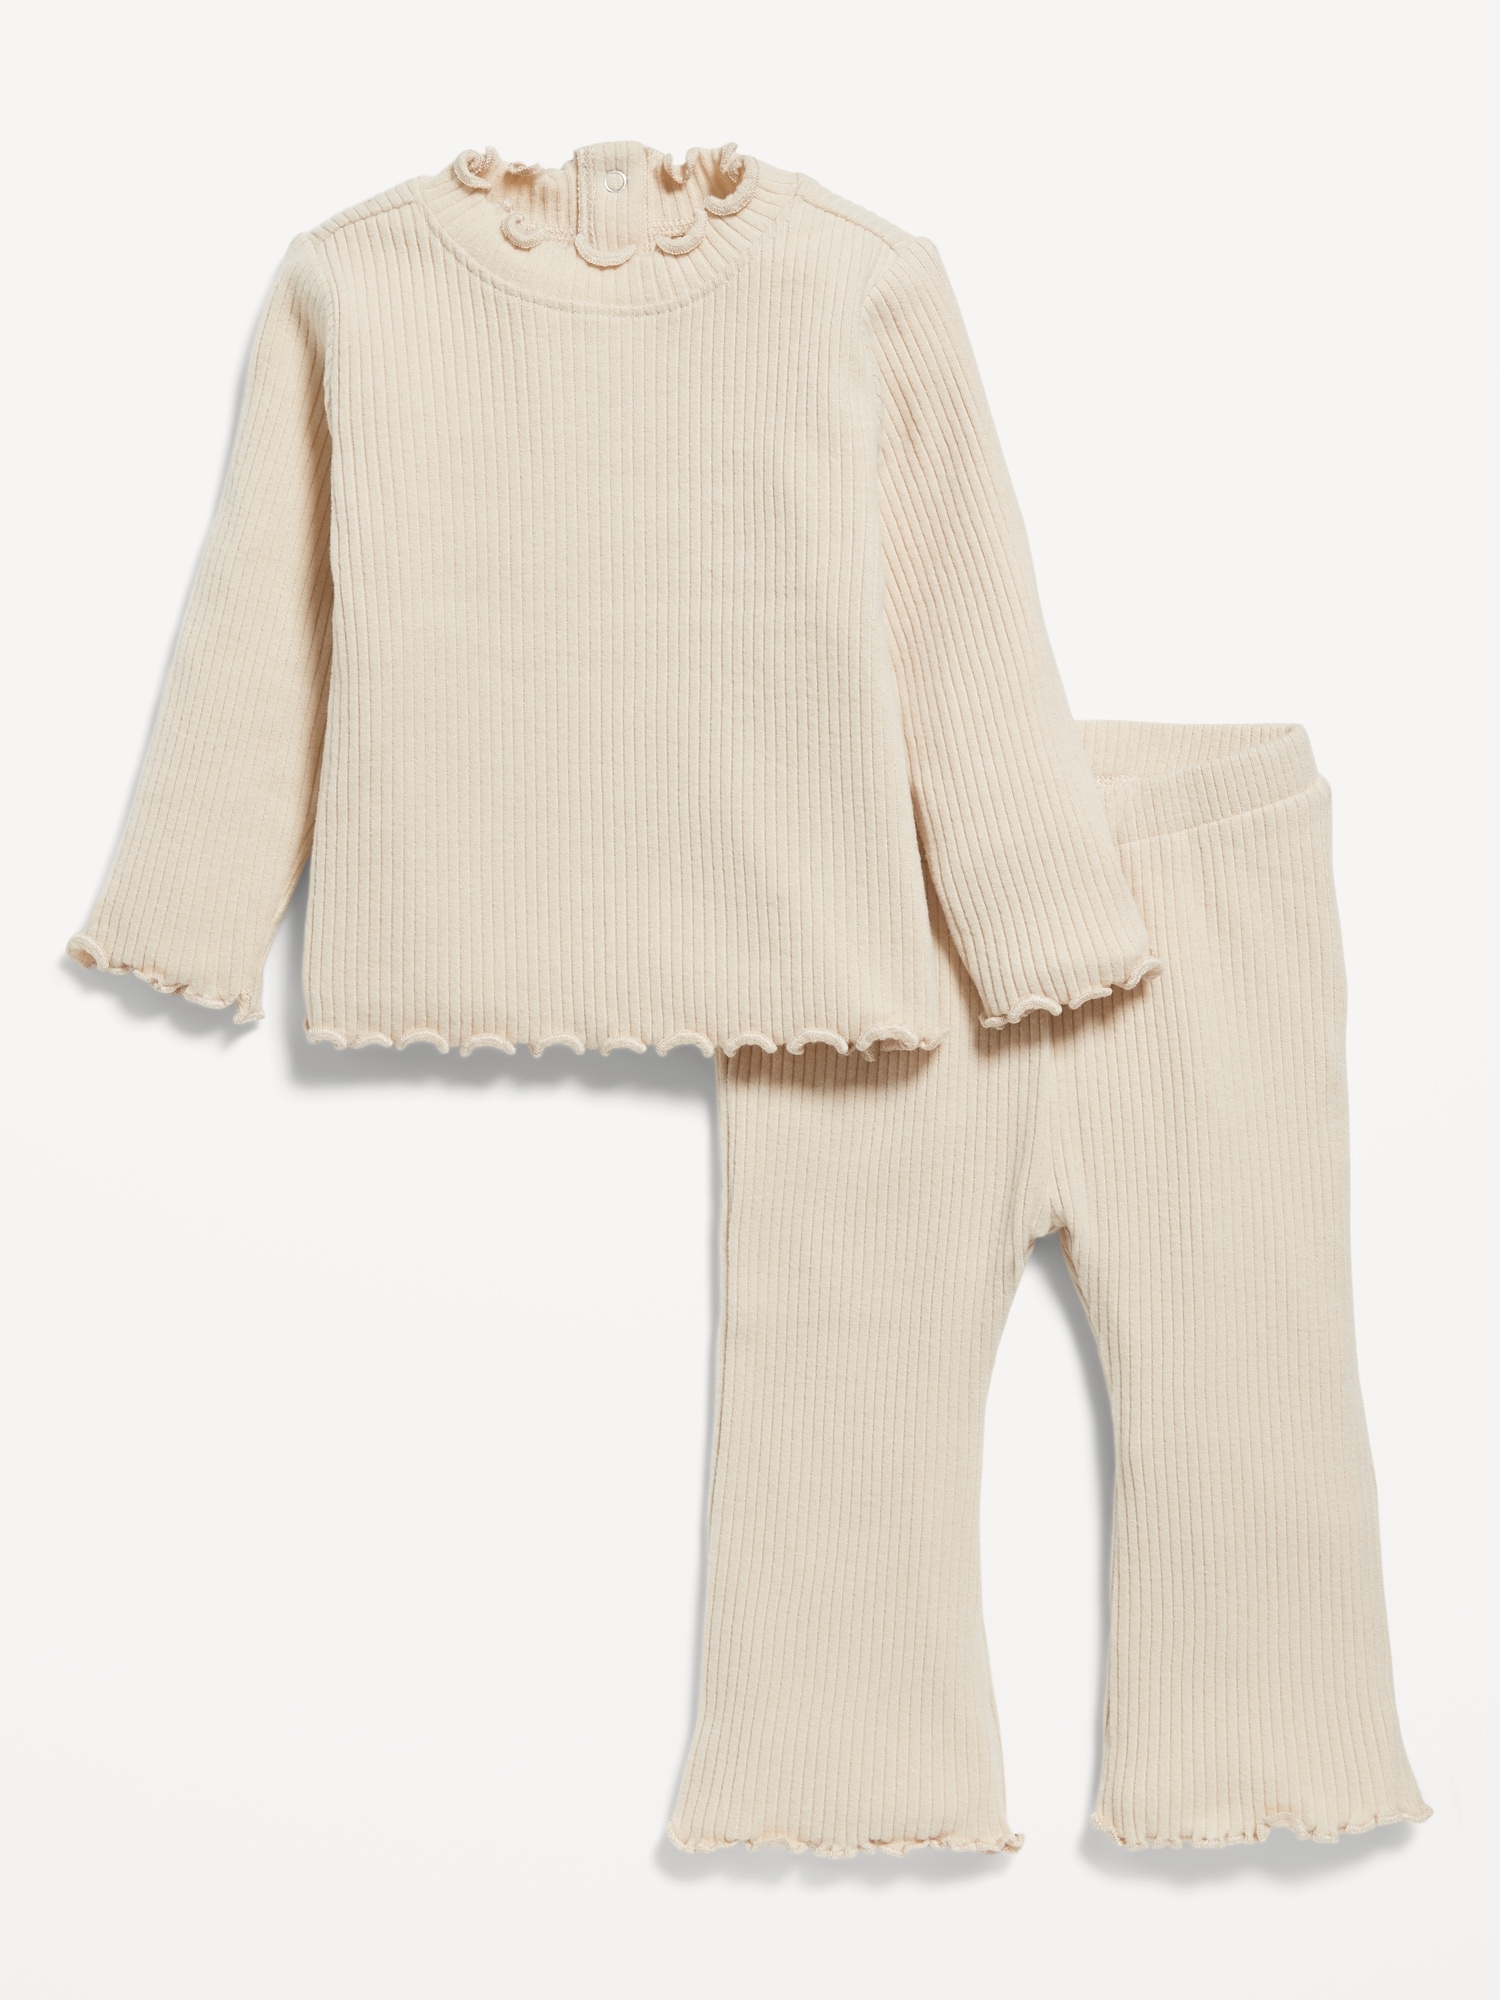 Plush Cozy-Knit Top &  Flare Pants Set for Baby